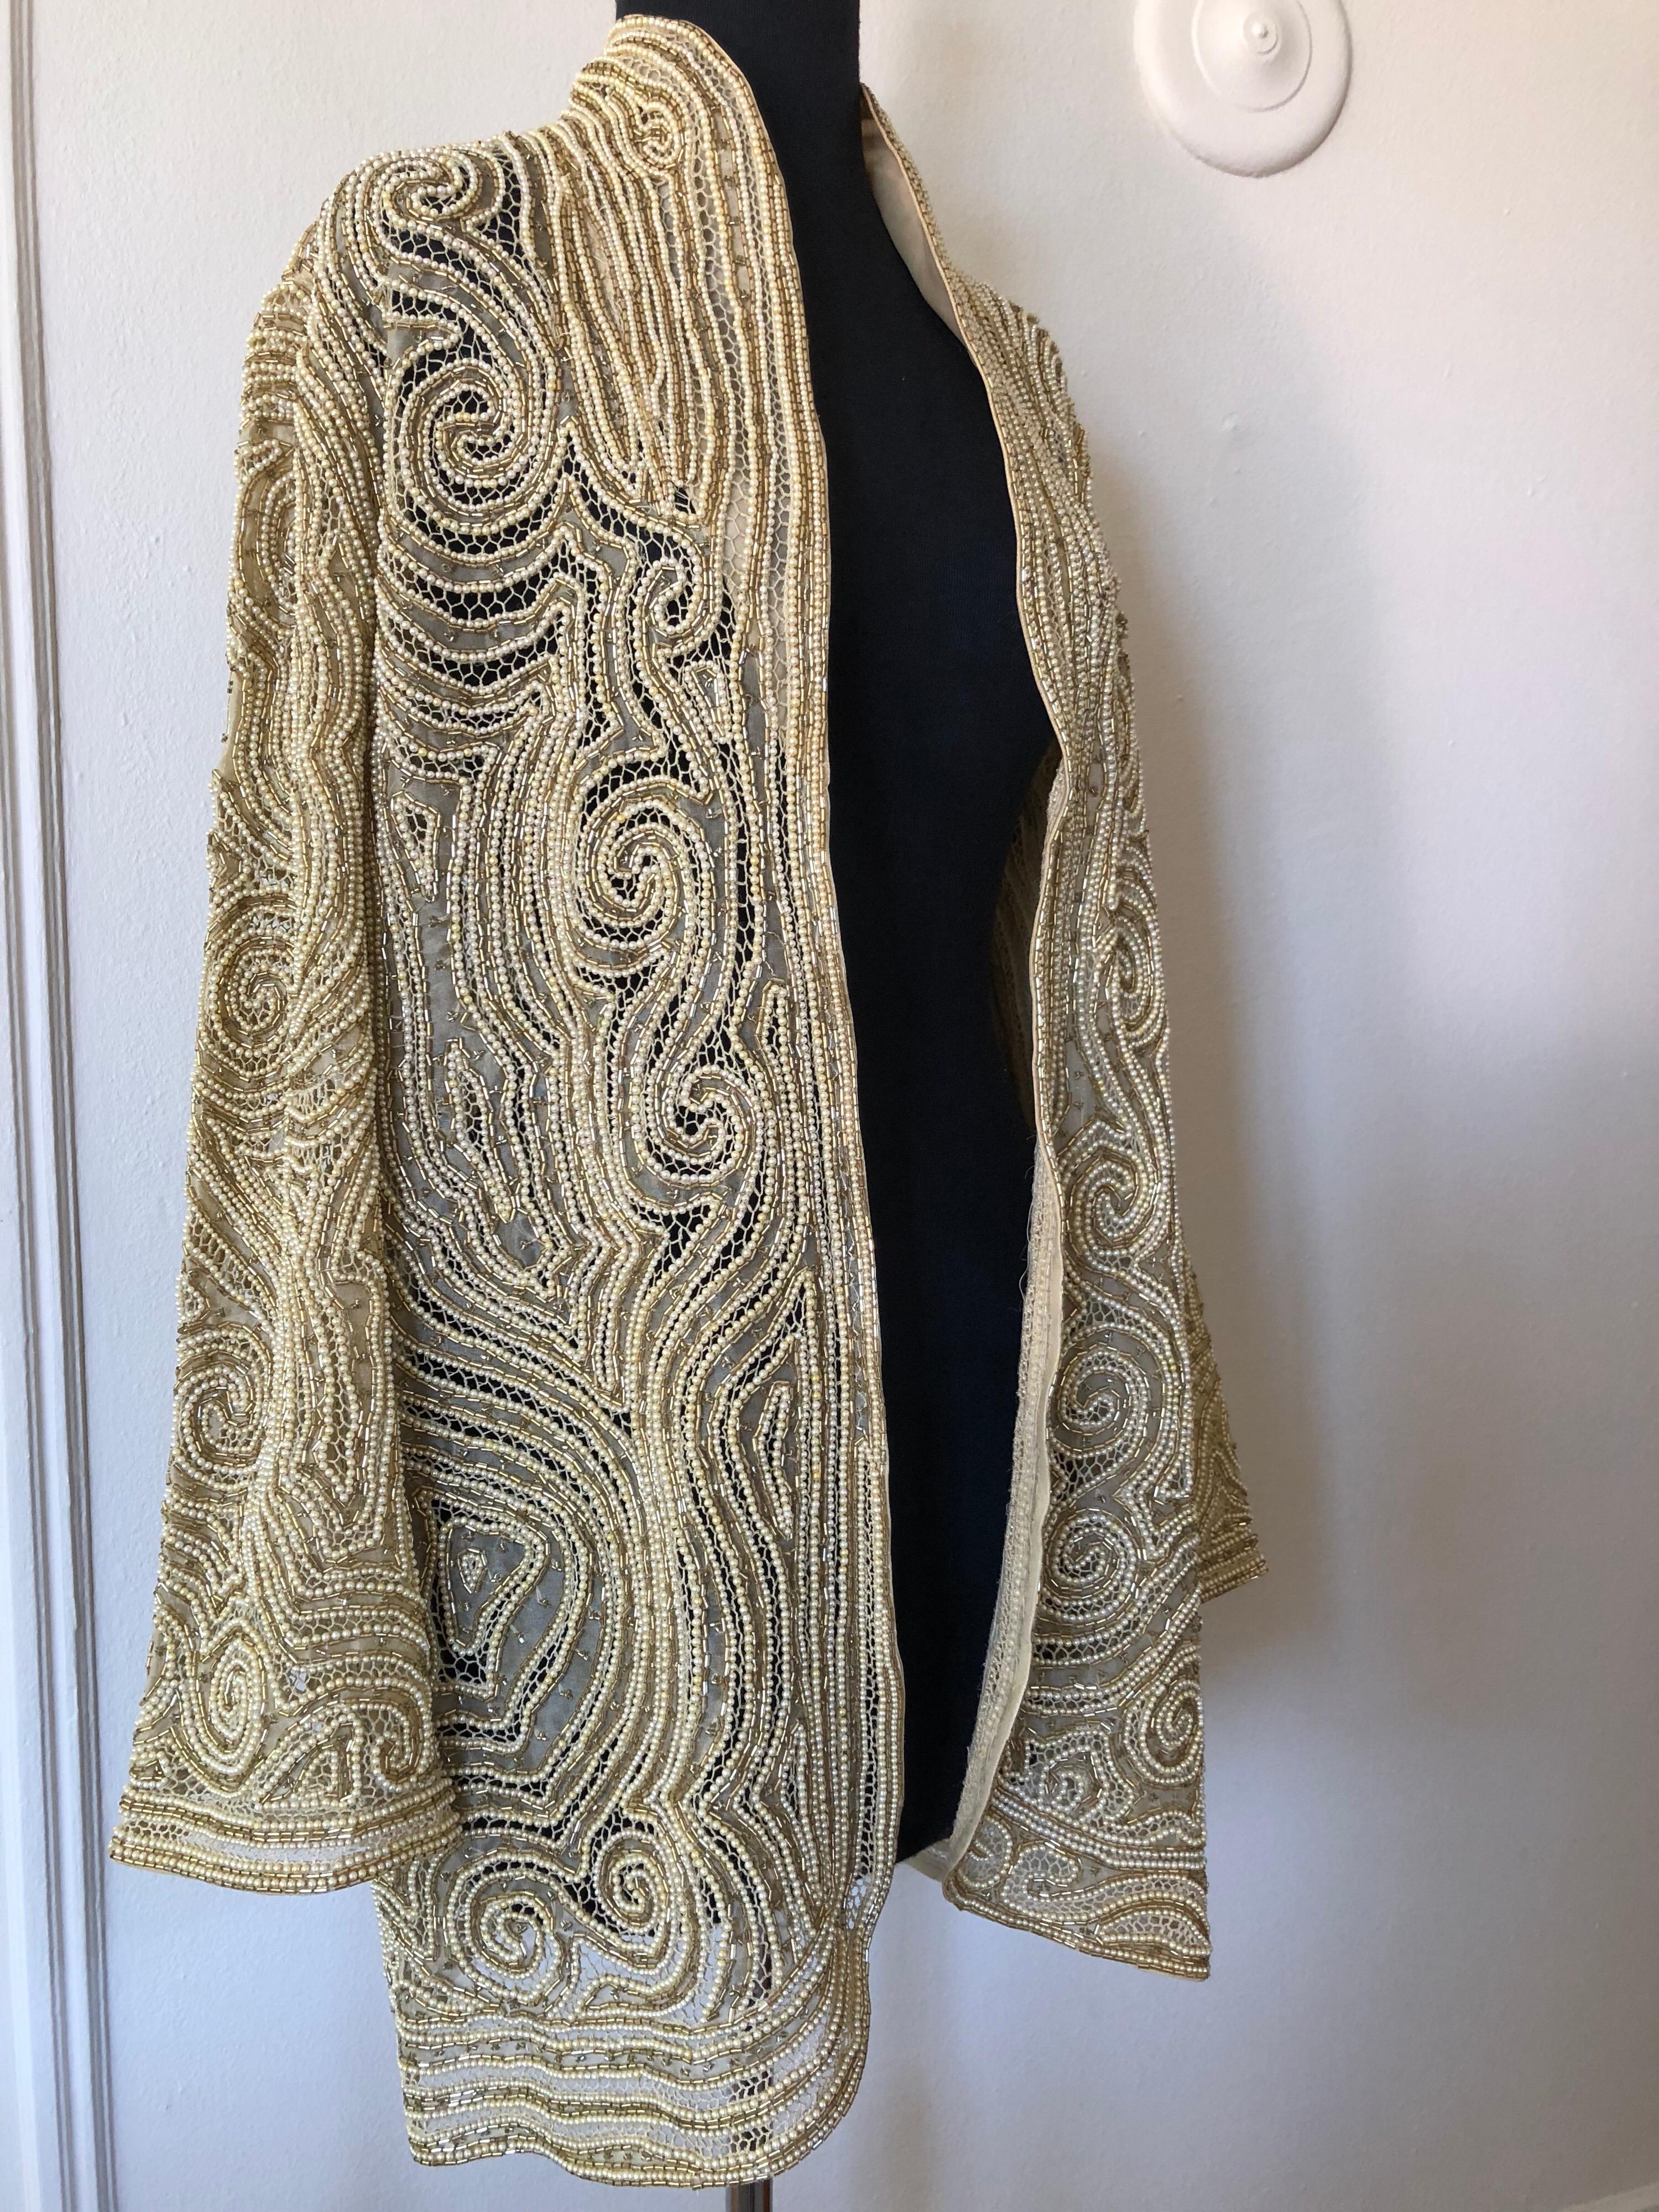 Halston Pearl Crochet and Gold Bugle Beaded Silk Organza Lace Jacket, 1980s  2